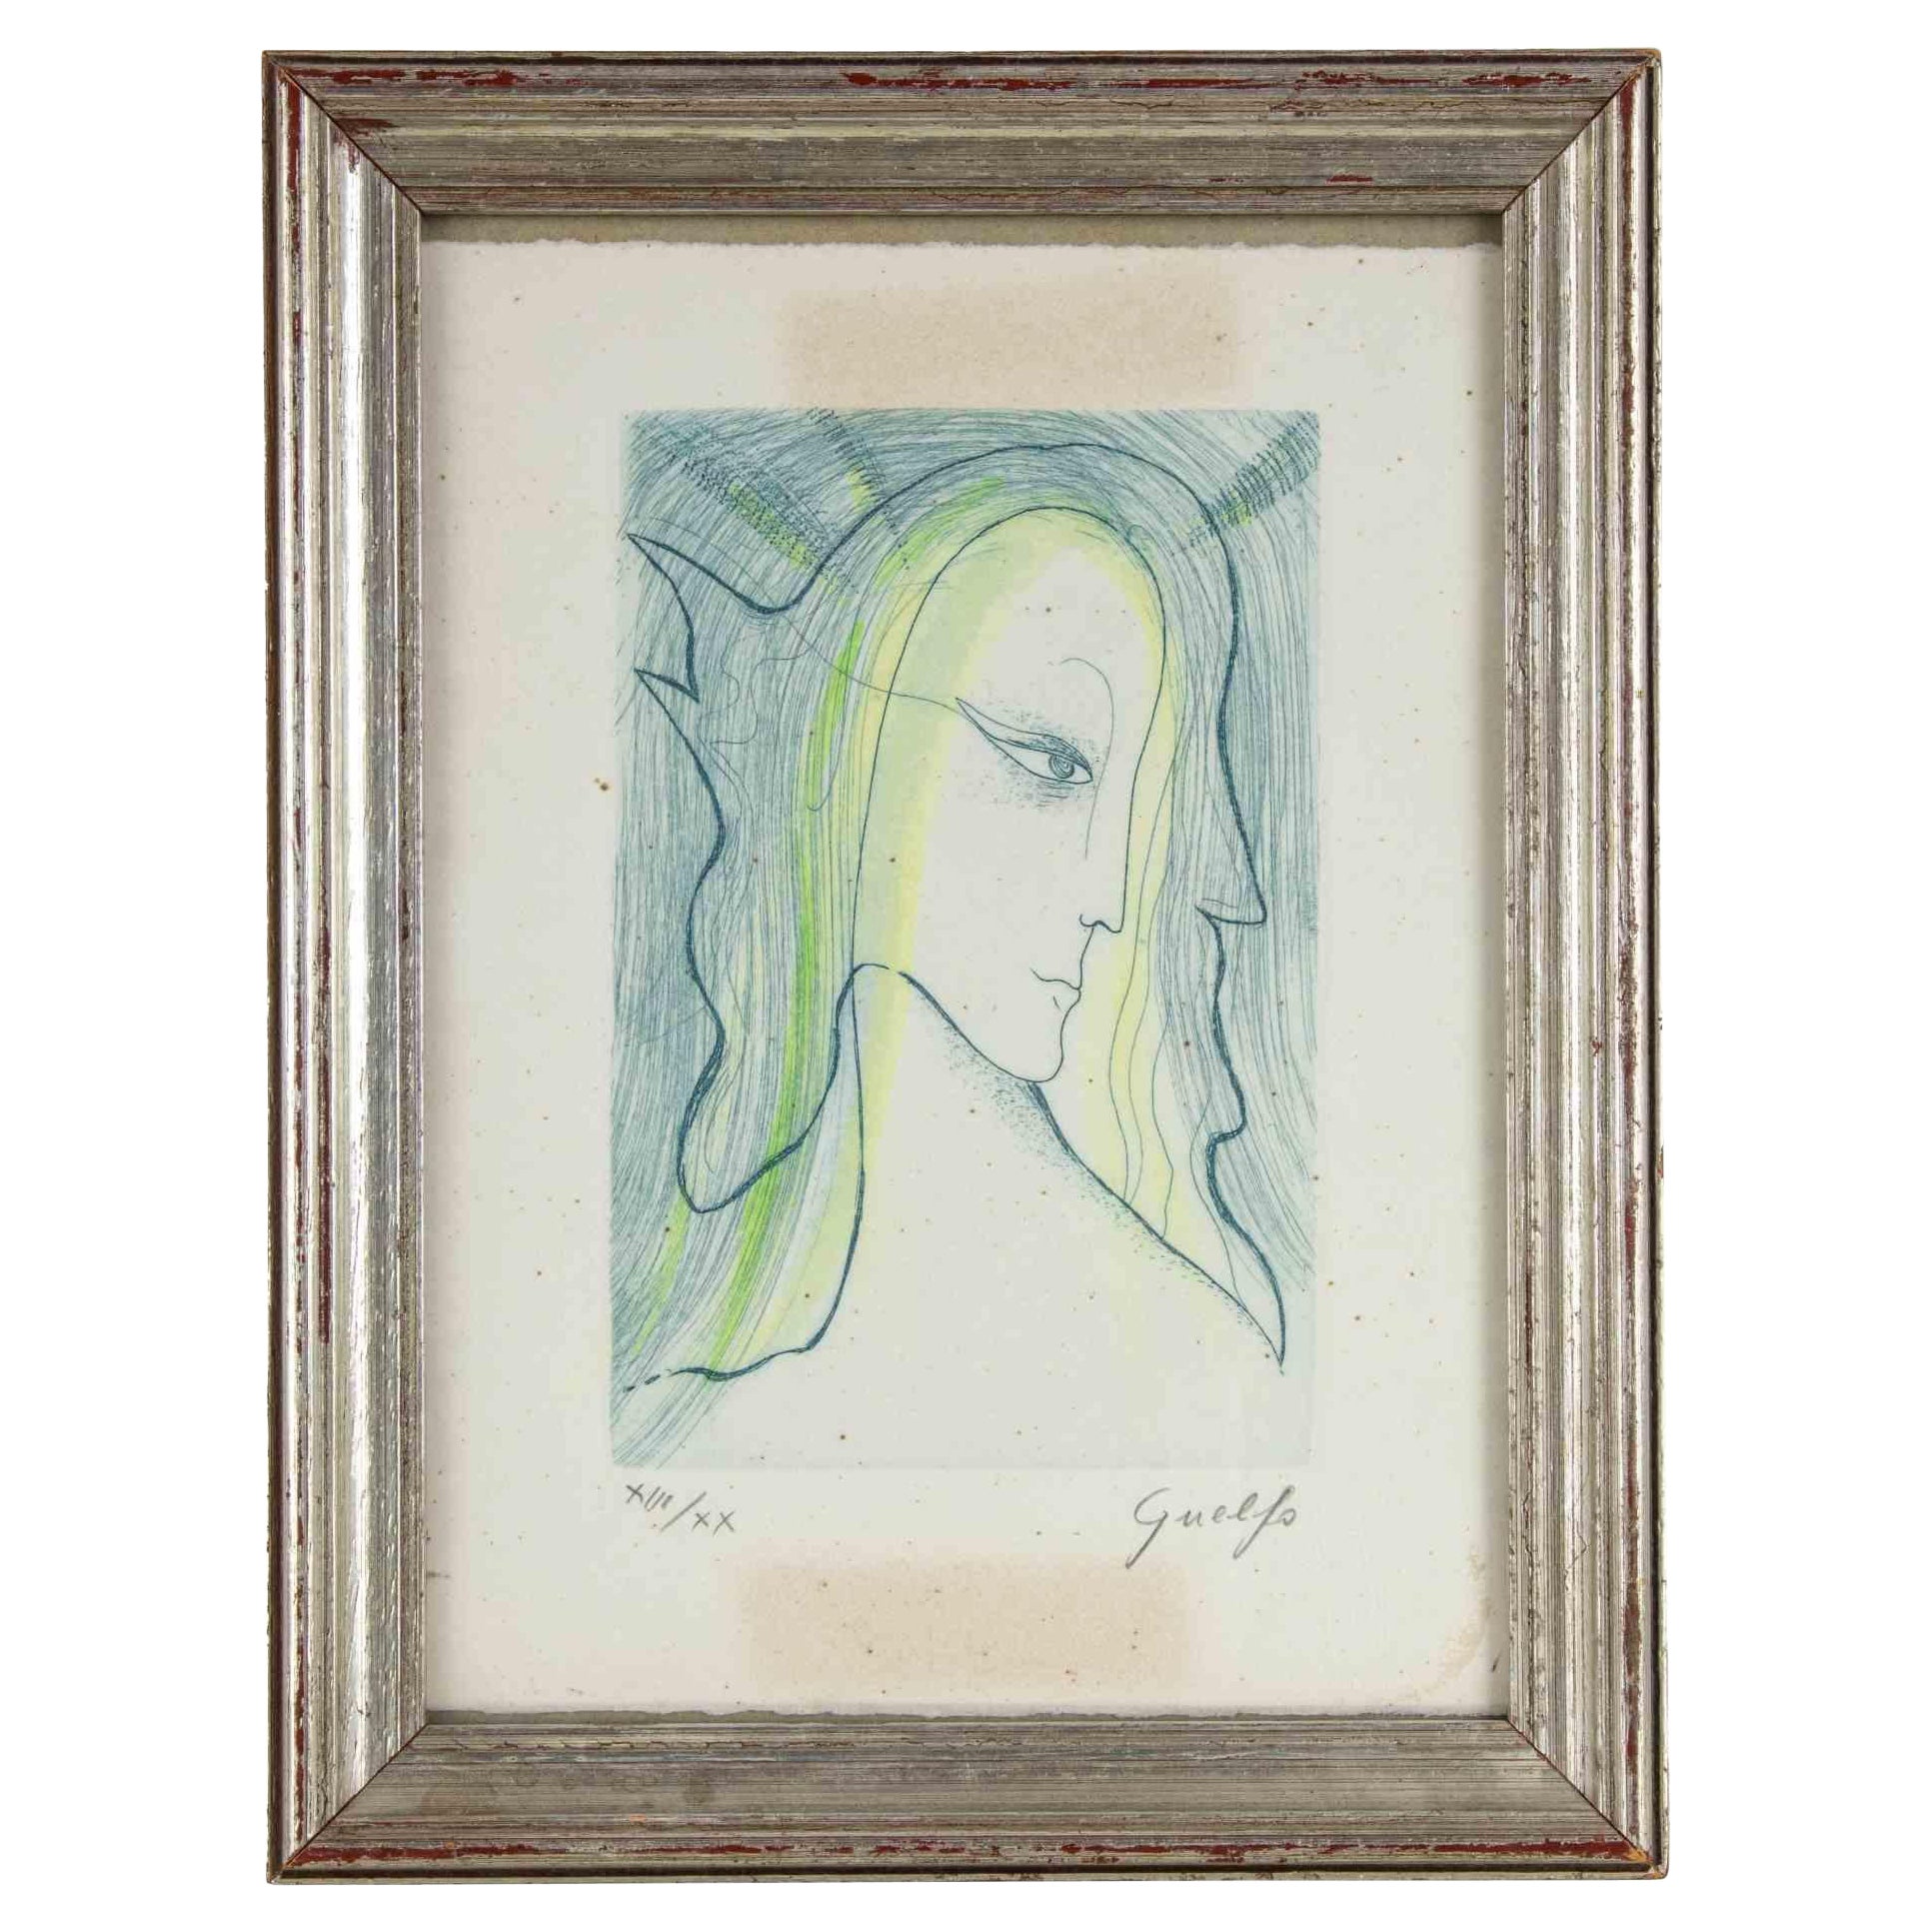 The Angel is an original modern Artwork realized in Italy by Guelfo Bianchini (Ancona, 1937) in 1984.

Original colored etching on paper. 

Hand-signed lower right corner. Limited edition series, numbered on the lower-left corner in pencil: